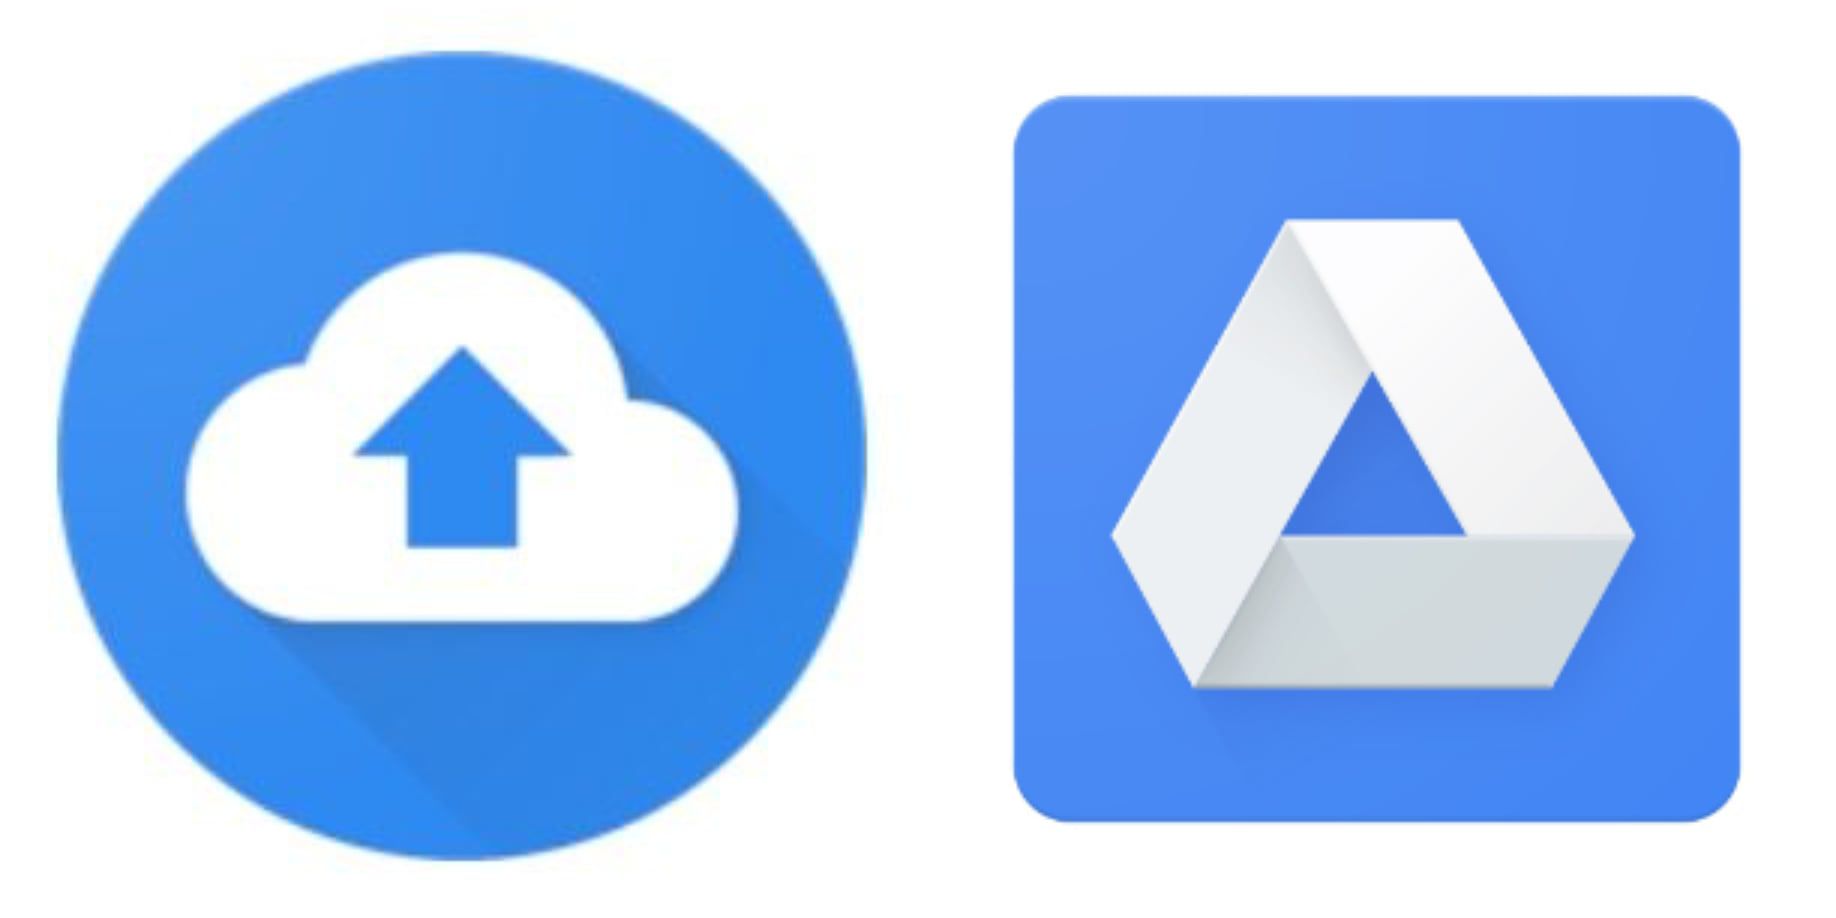 What replaced Google Backup and sync?